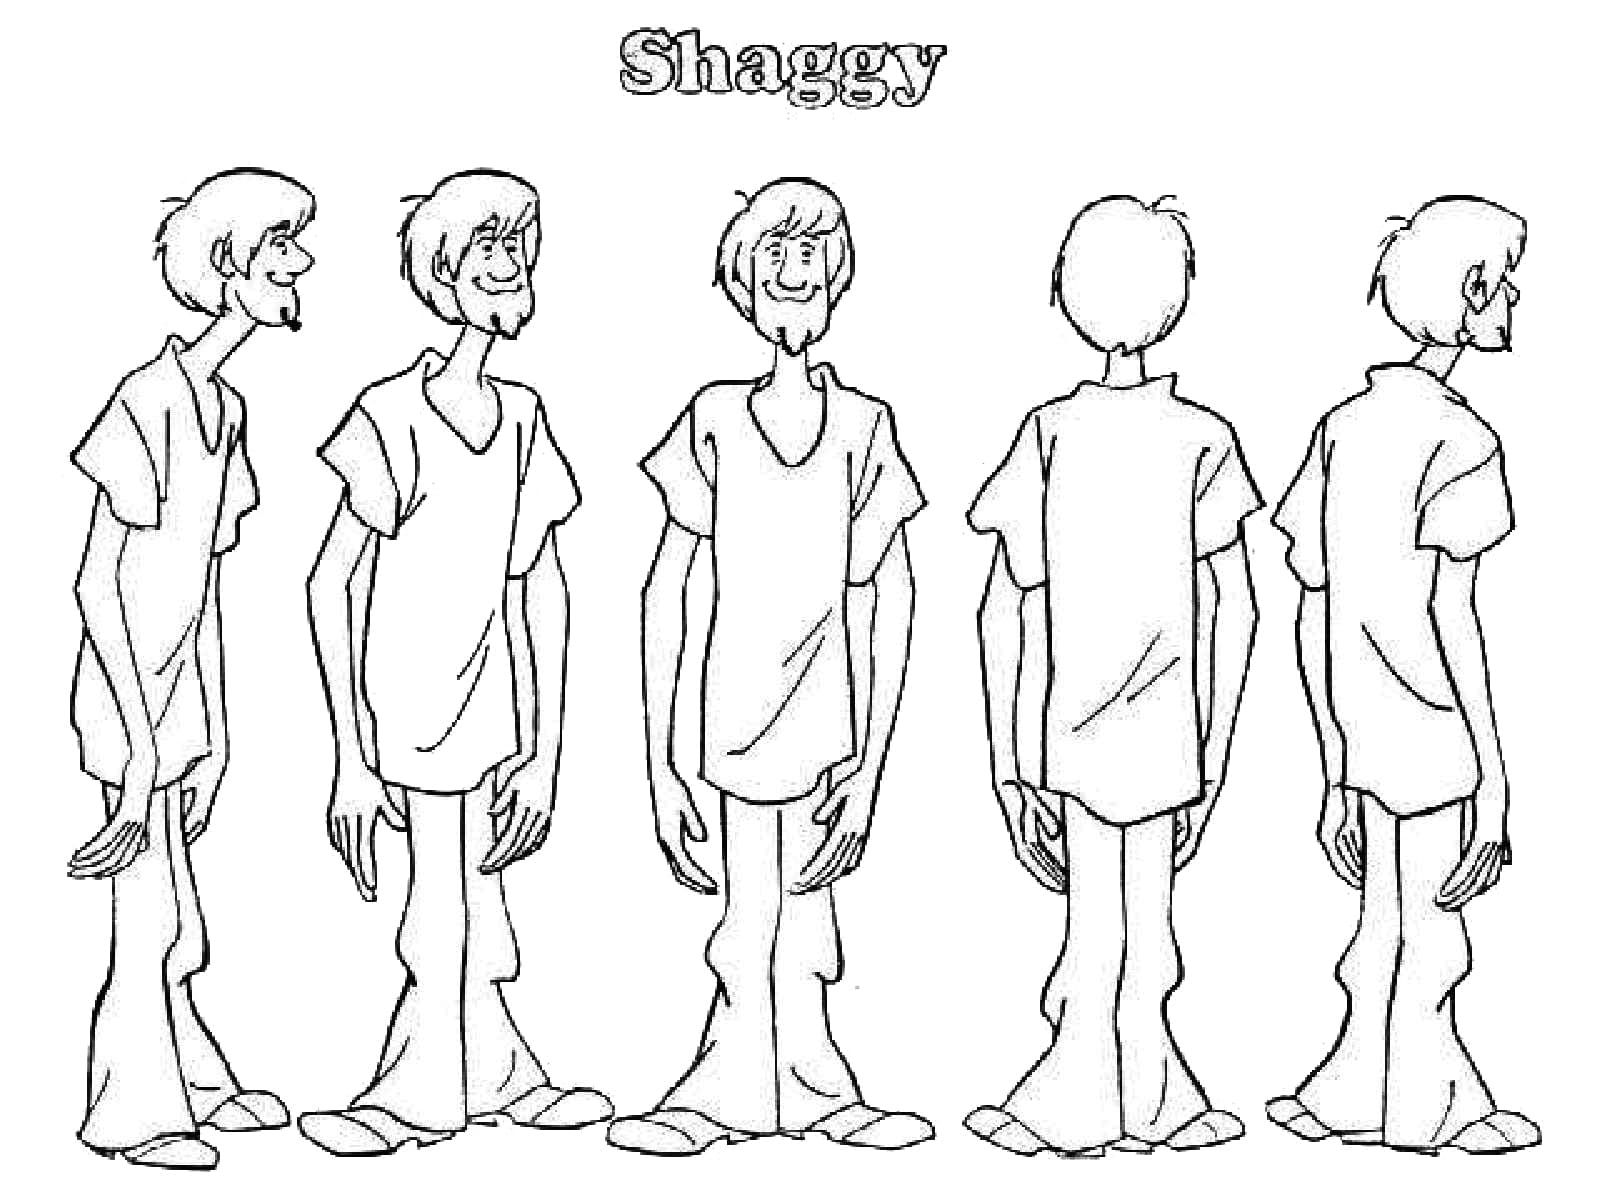 Shaggy 2 Coloring Page